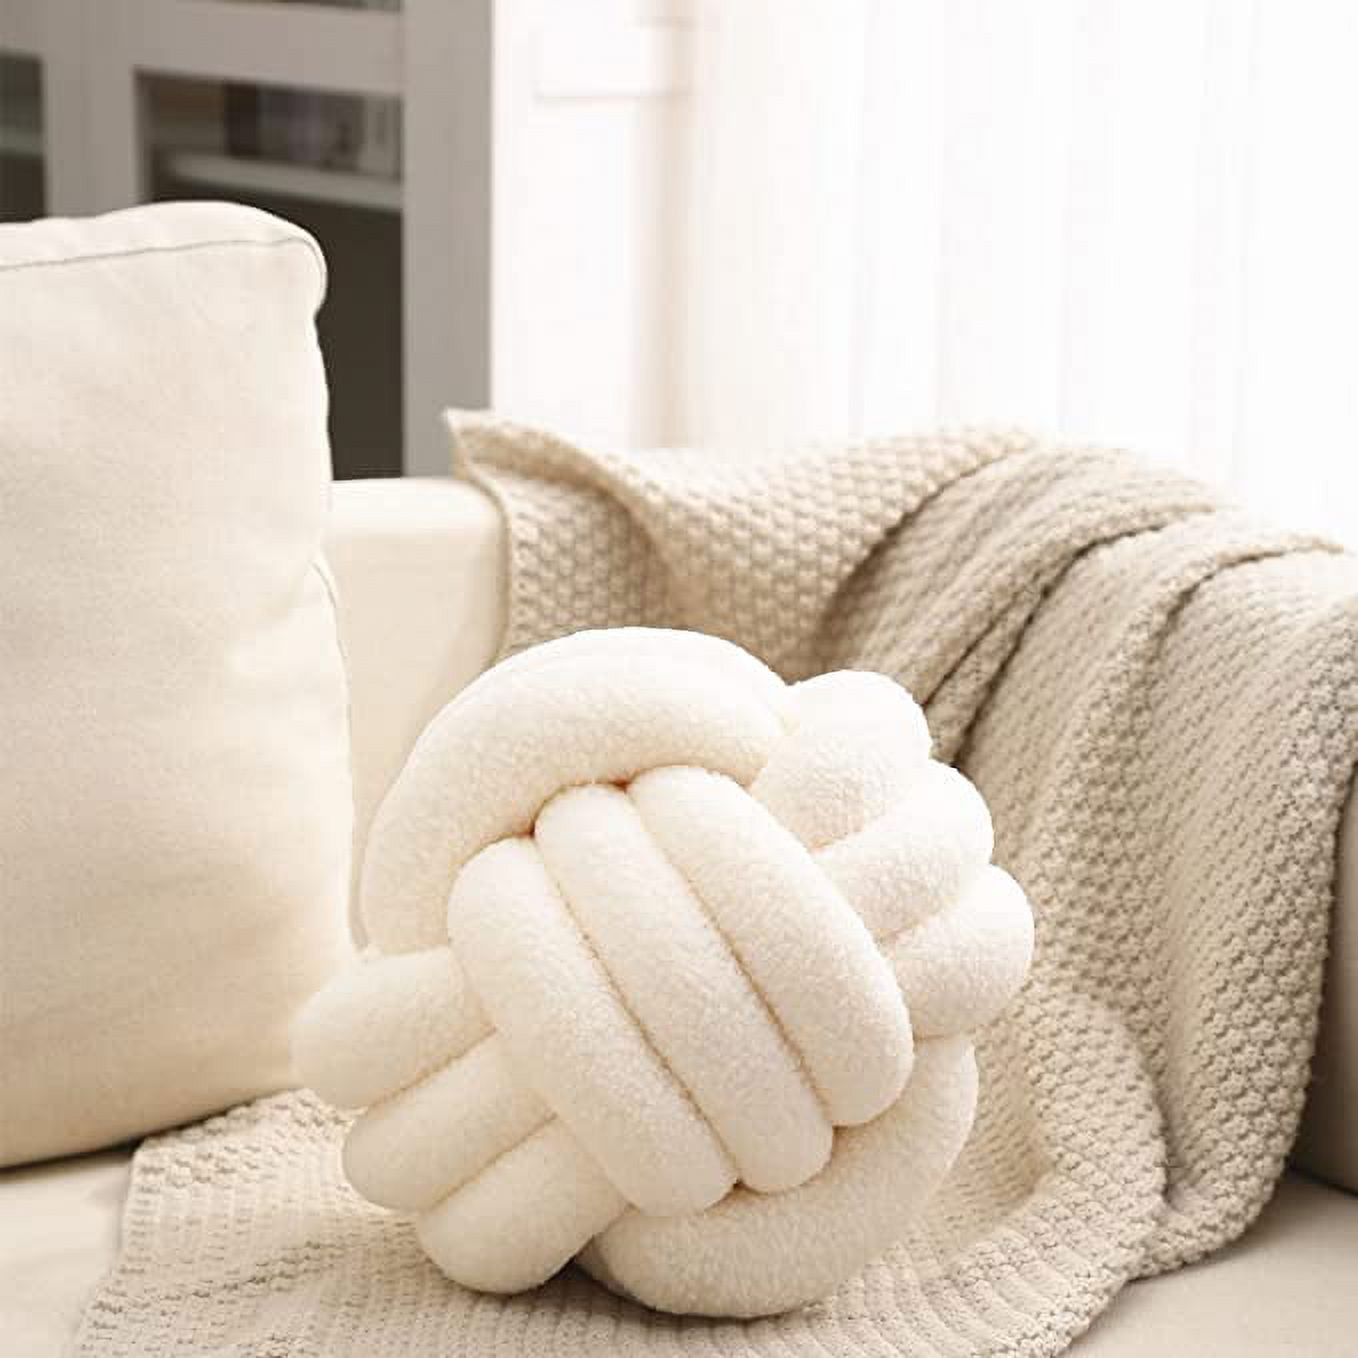 Uvvyui Knot Pillow Ball, Soft Ivory Home Decor Knotted Pillows, Handmade  Round Plush Throw Pillow, Aesthetic & Cute Large Decorative Pillows for  Bed